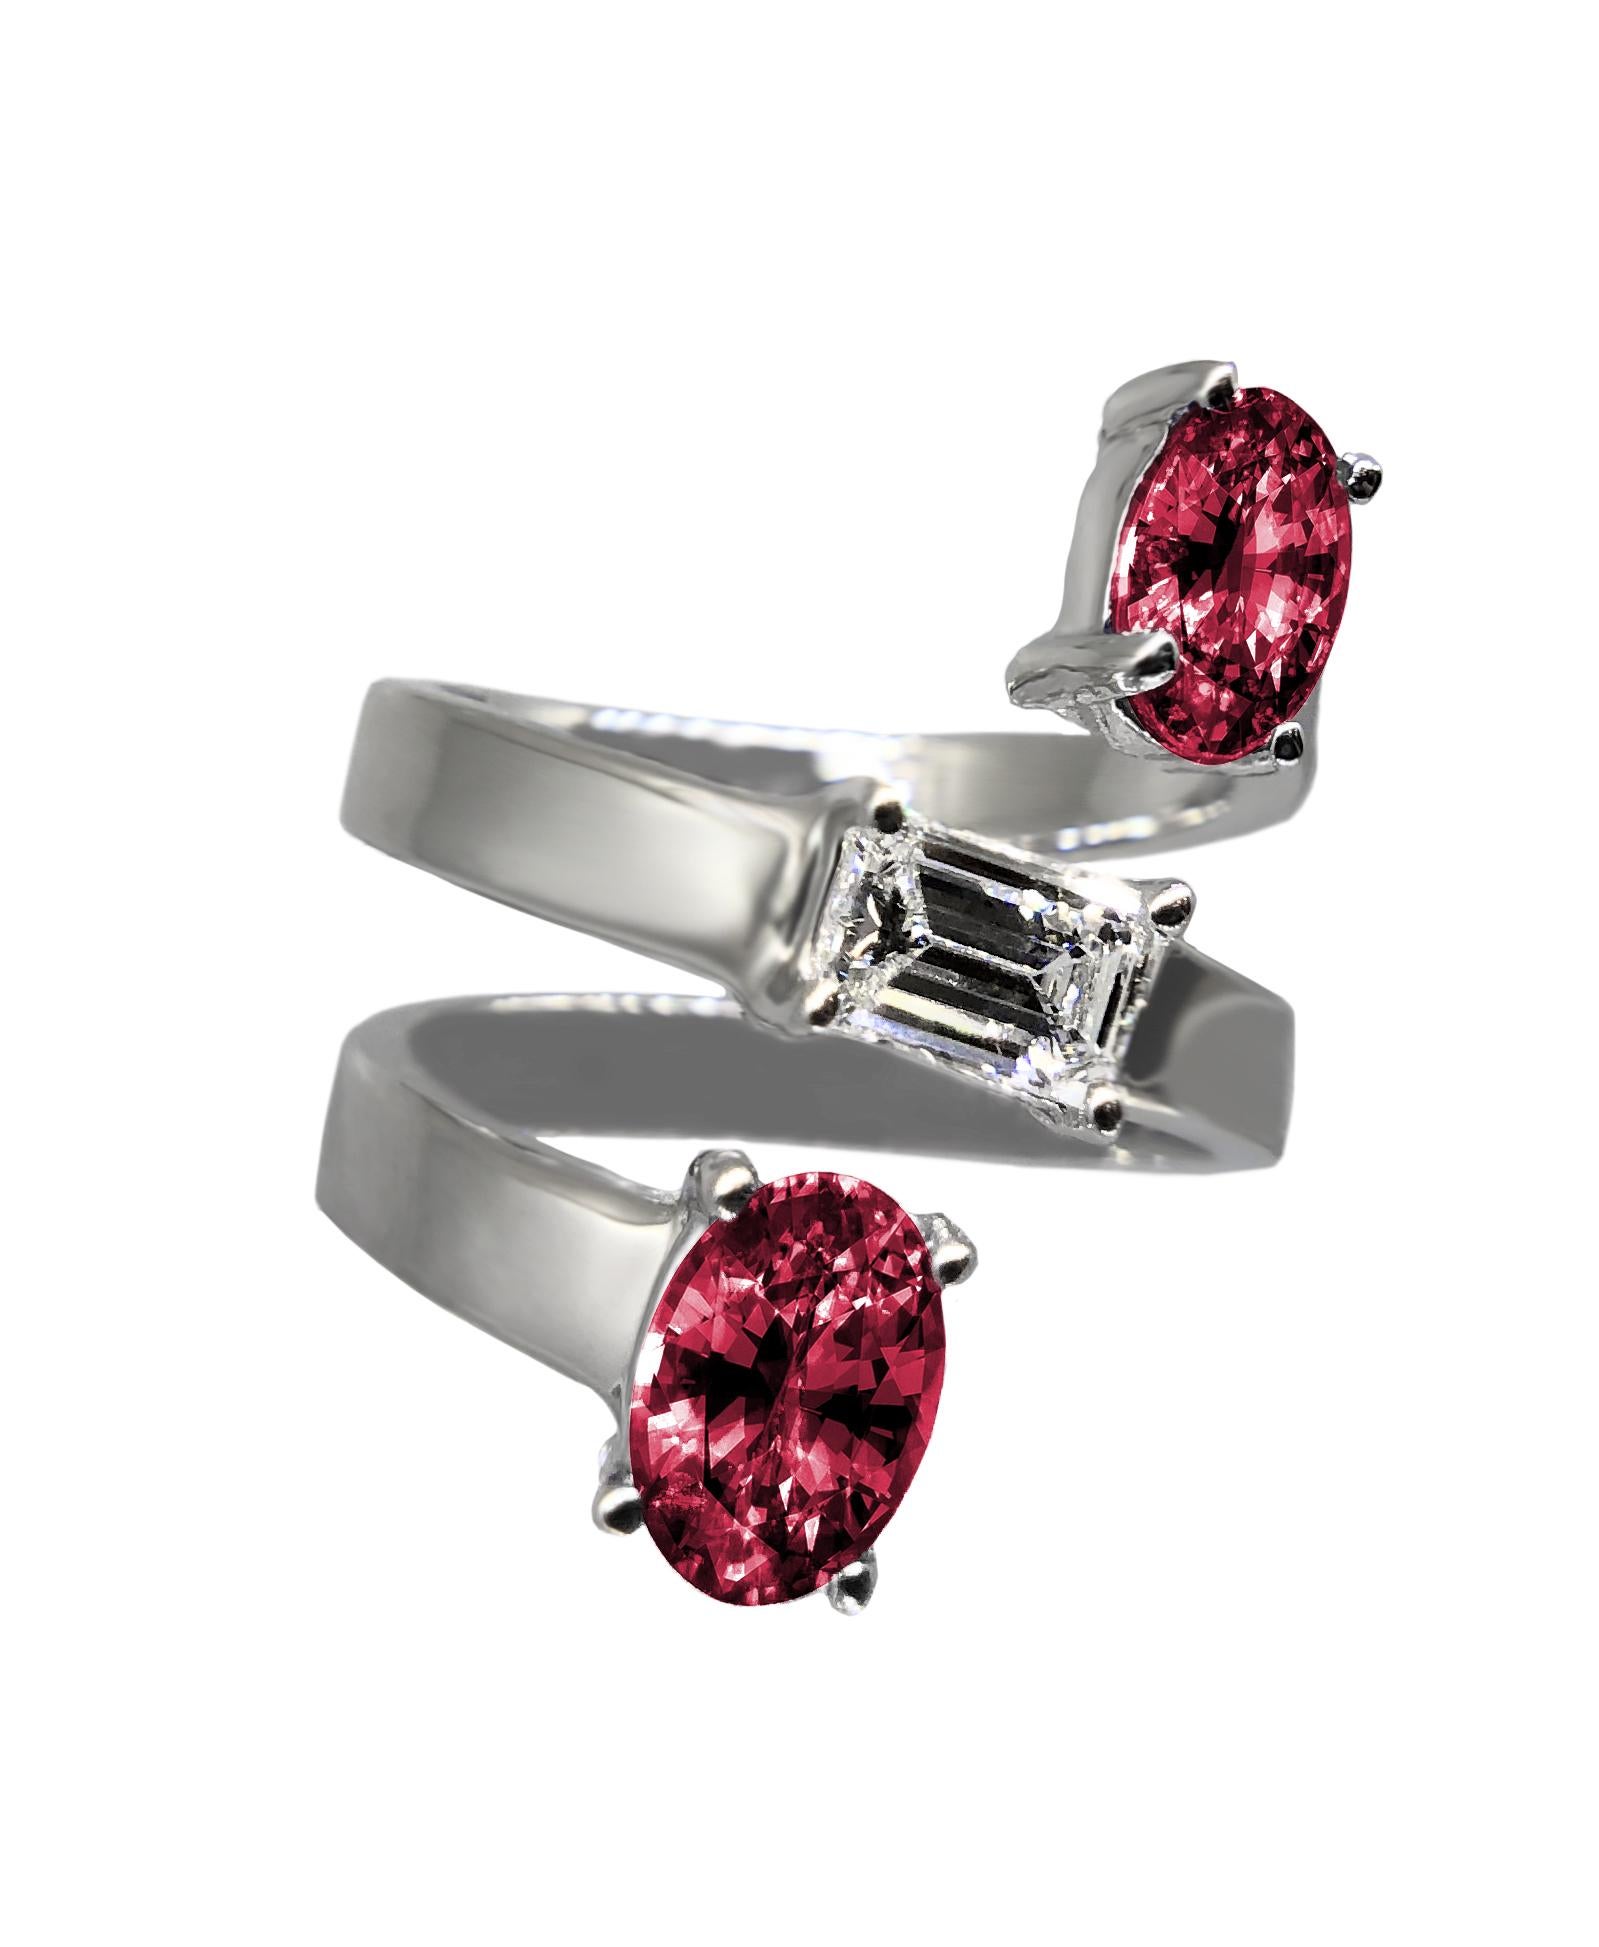 An exceptional and impressive ring by the American high jewelry designer, Drew Pietrafesa. Mounted in 18K white gold, a VS quality emerald-cut diamond is joined by two red oval rhodolite garnet gemstones. This snake ring will wrap your finger in